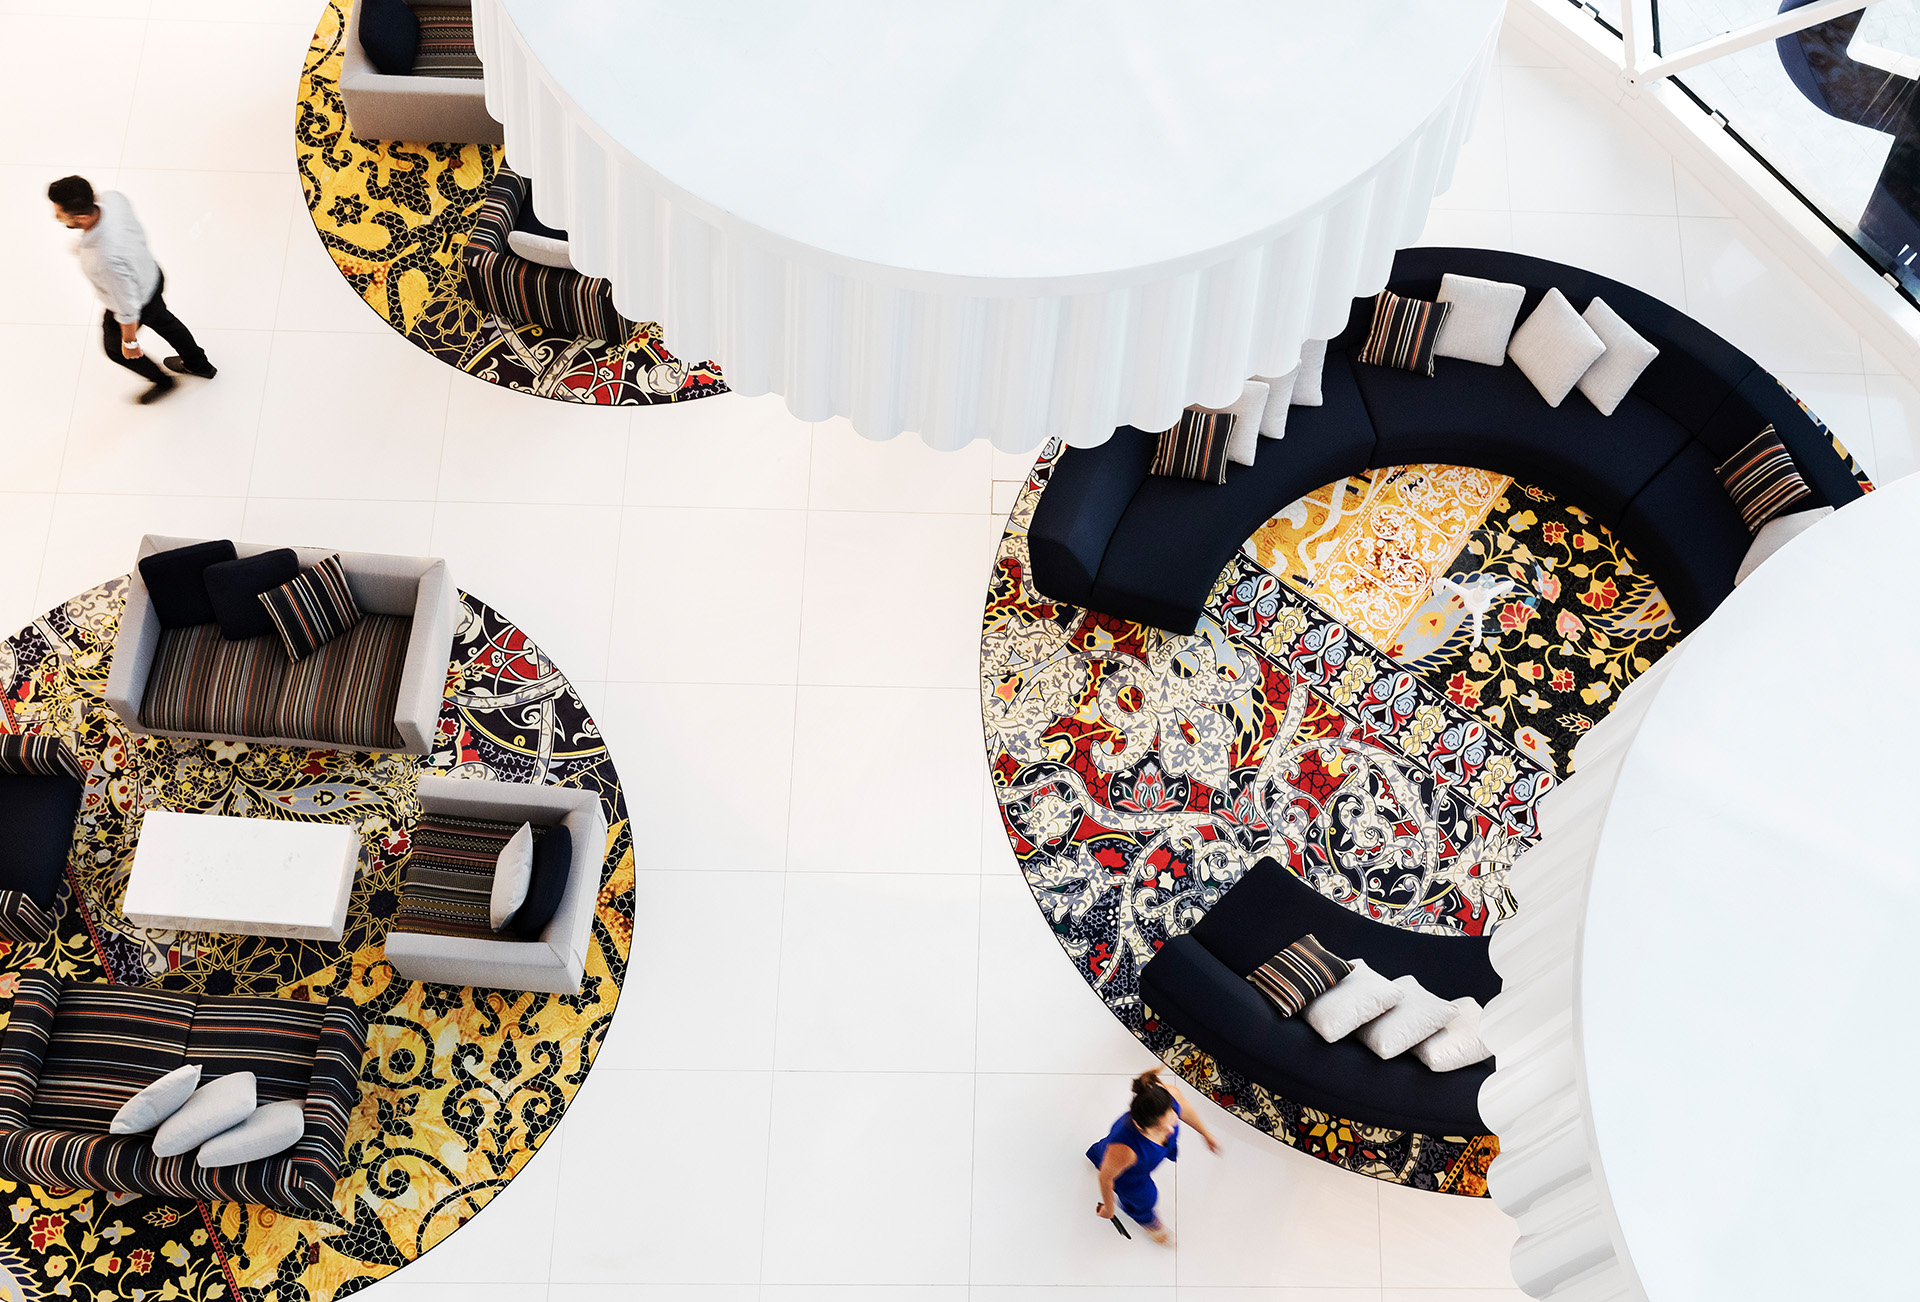 A bird's eye view of a hotel lobby with round, colorful seating islands.